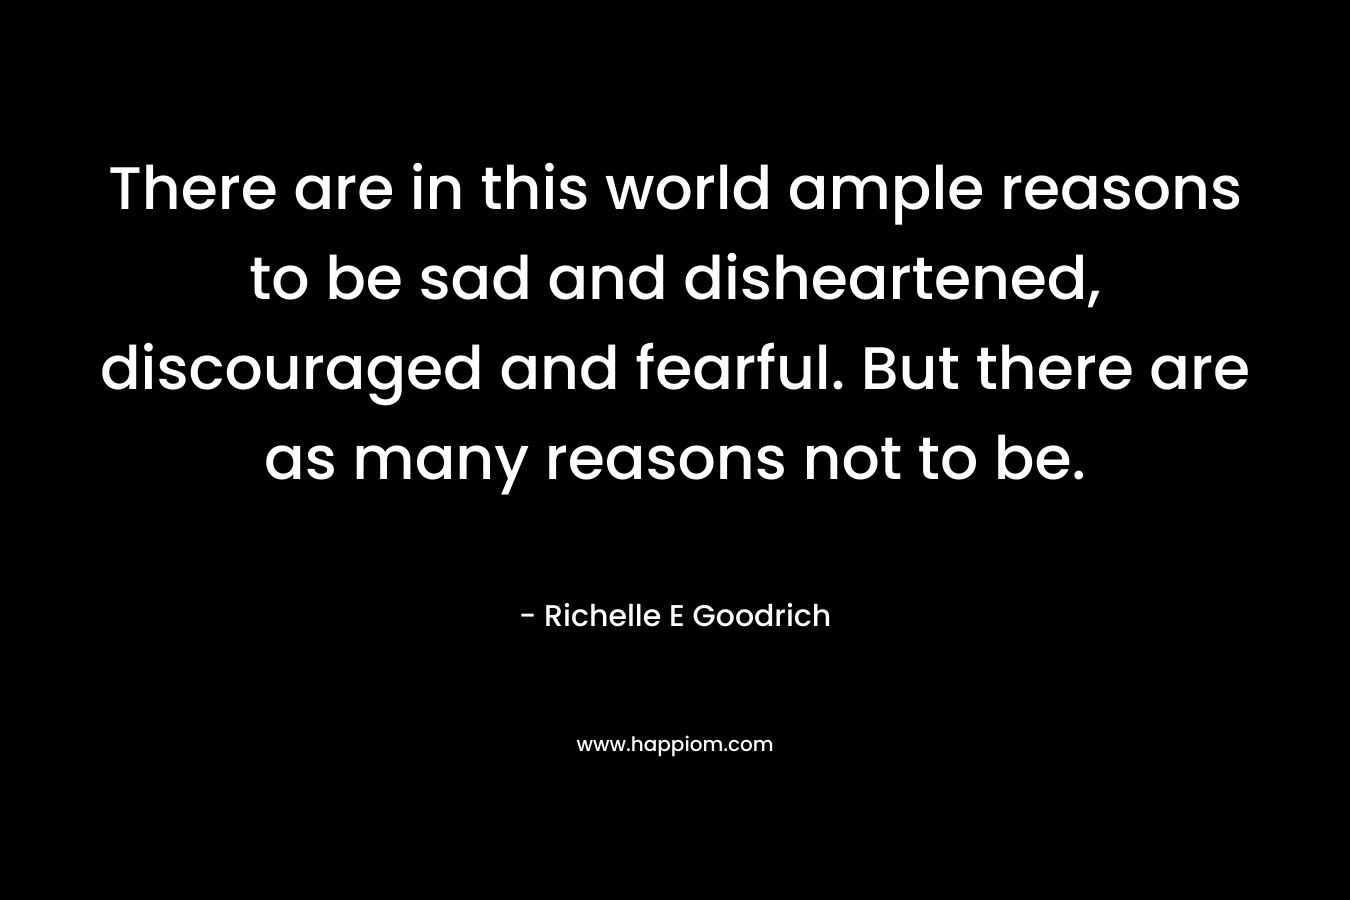 There are in this world ample reasons to be sad and disheartened, discouraged and fearful. But there are as many reasons not to be.